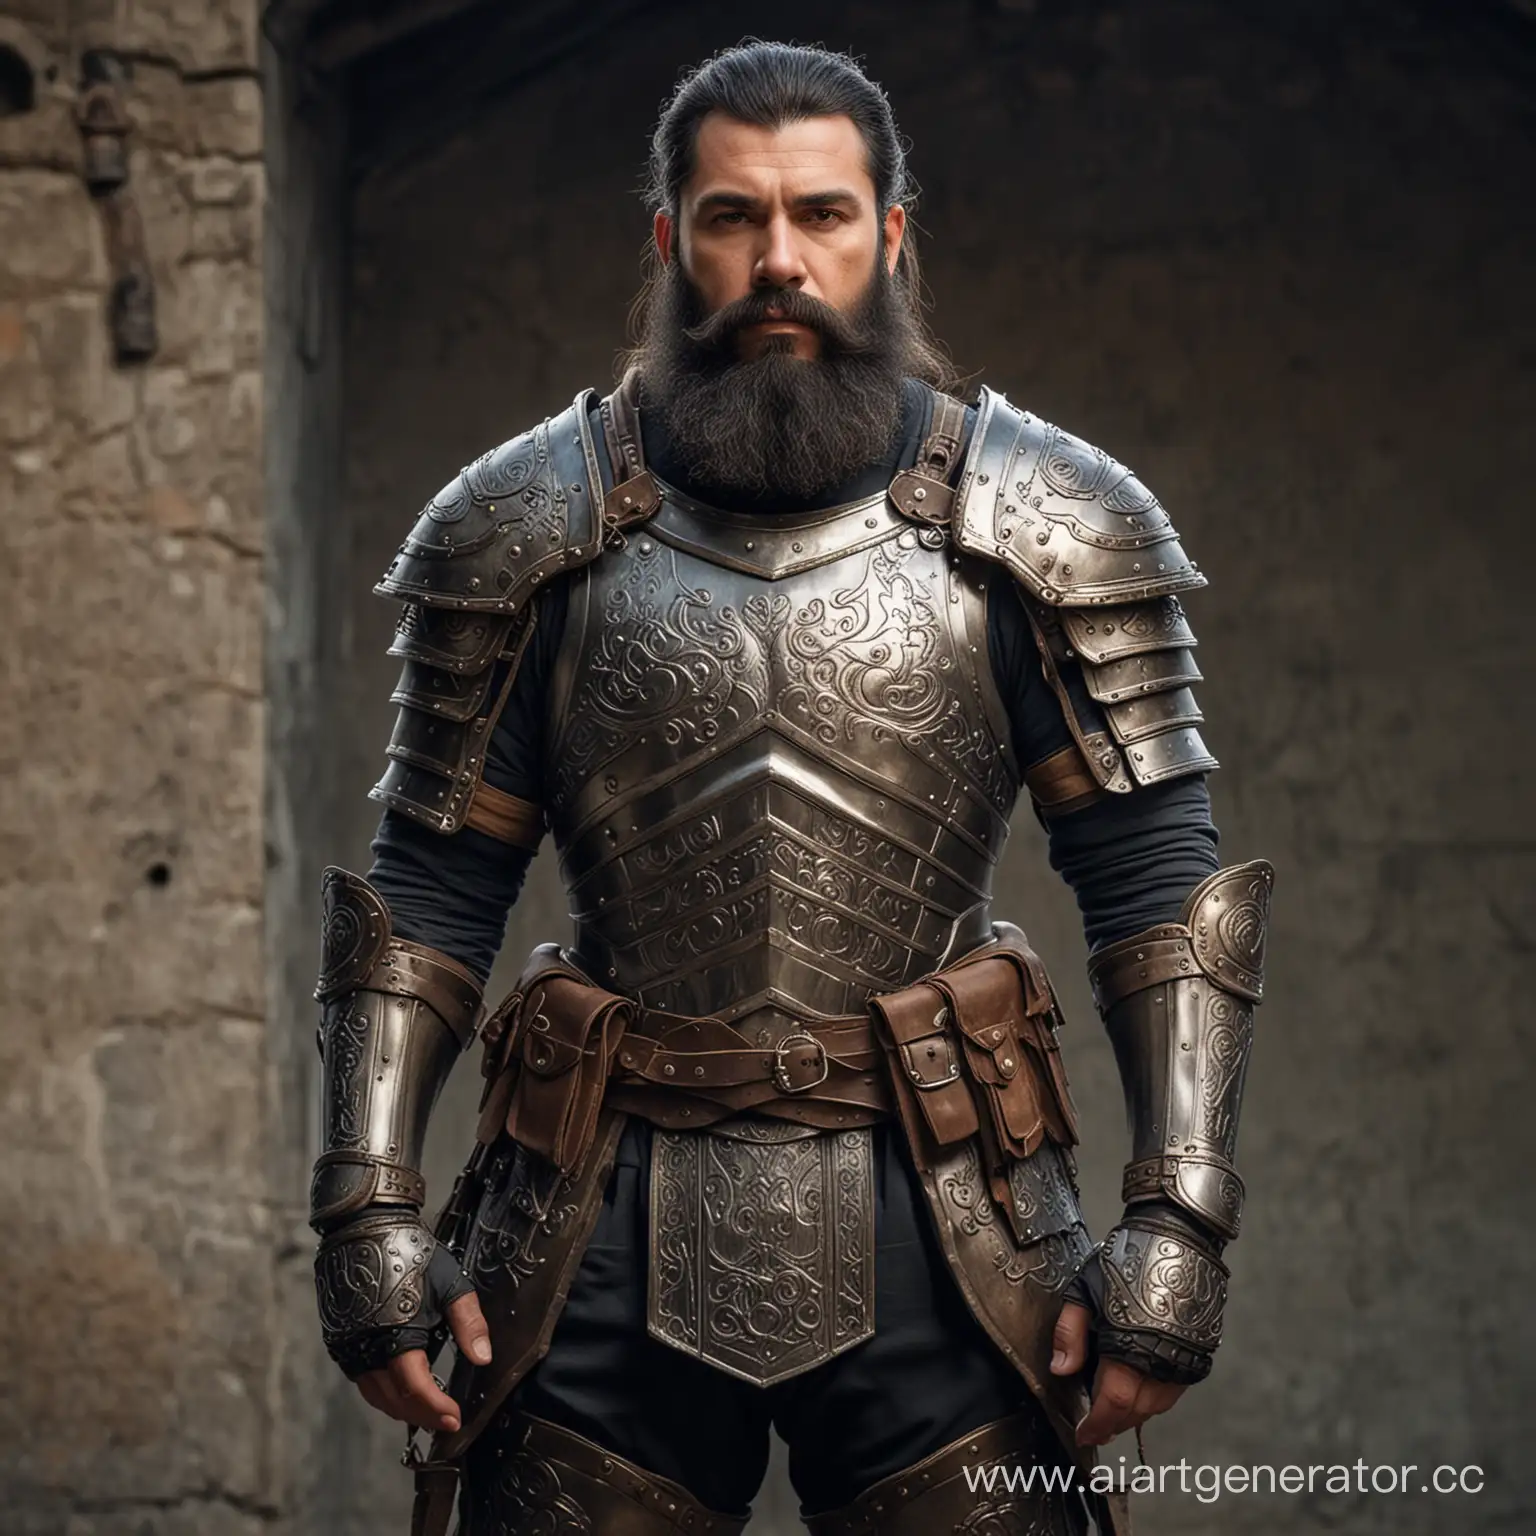 Urban-Guard-Leader-in-Heavy-Medieval-Armor-with-Mechanical-Prosthetic